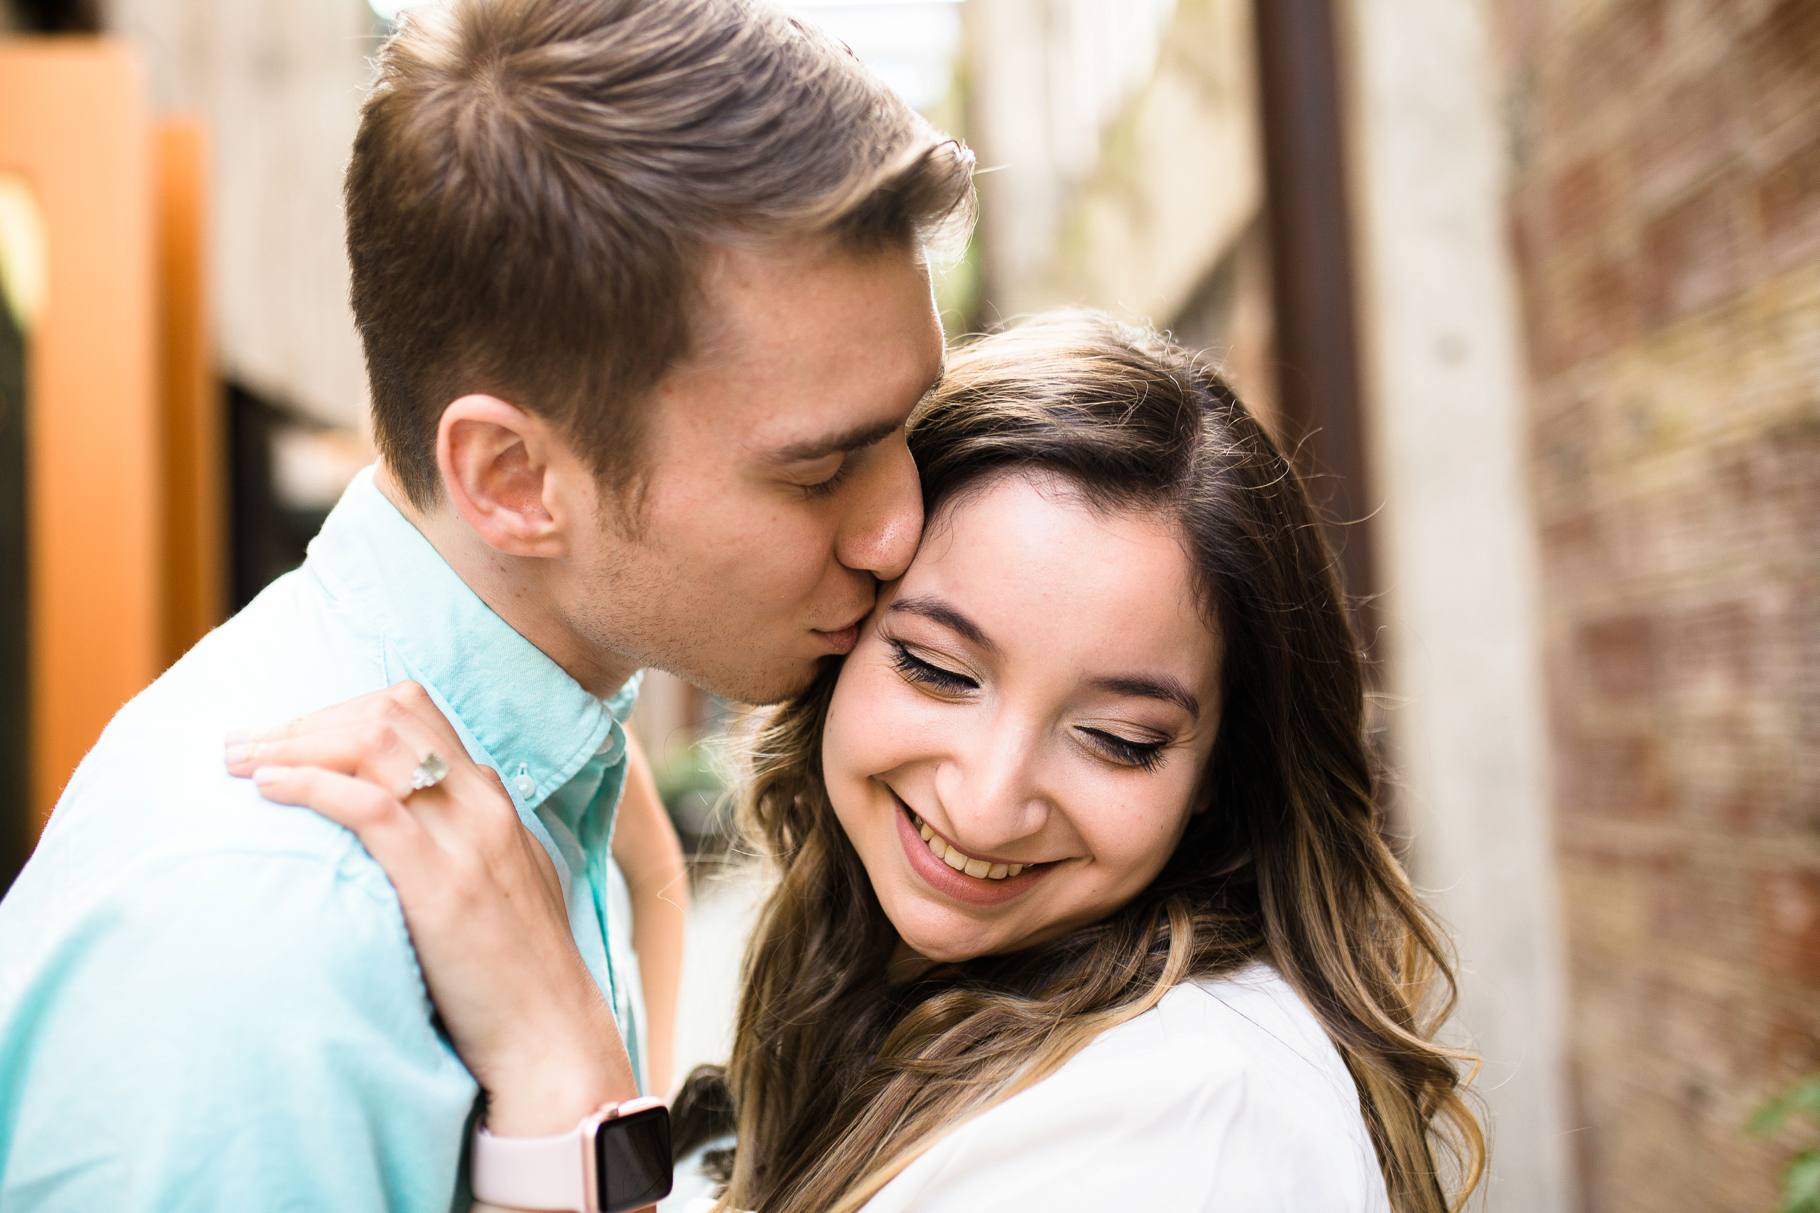 4-Capitol-Hill-date-Engagement-Session-seattle-wedding-photographer